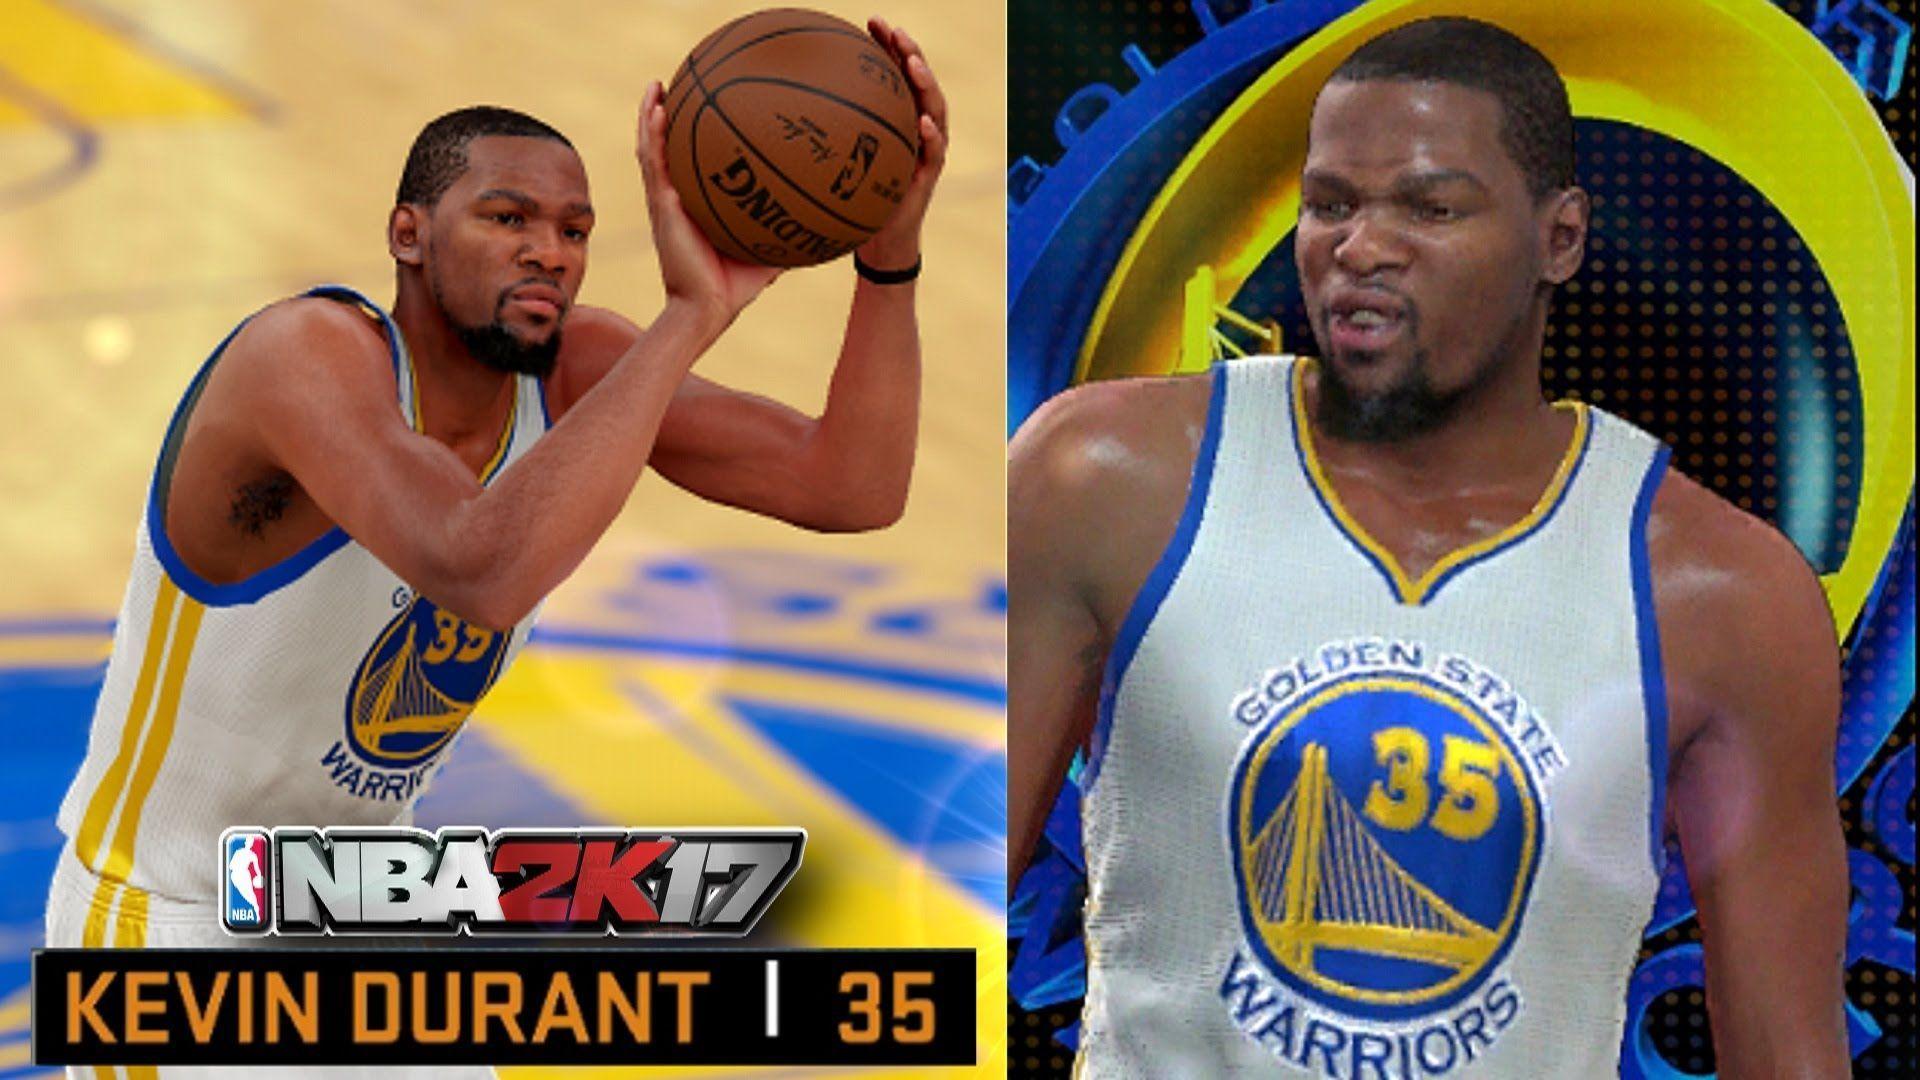 NBA 2K17 WARRIORS MOST OVERPOWERED TEAM WITH KEVIN DURANT